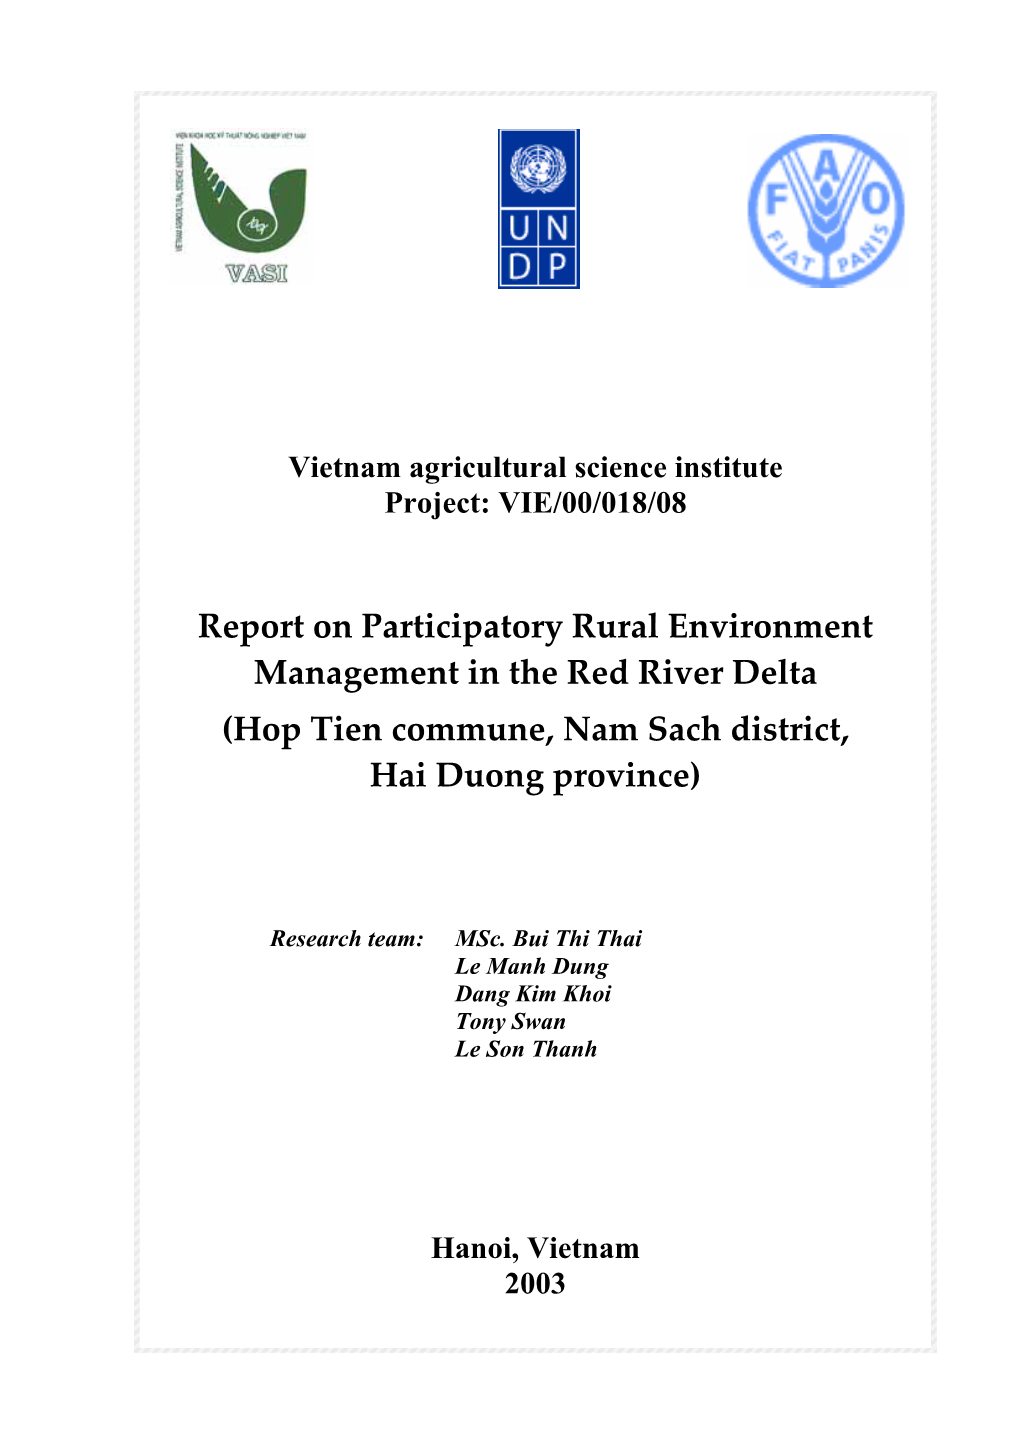 Report on Participatory Rural Environment Management in the Red River Delta (Hop Tien Commune, Nam Sach District, Hai Duong Province)